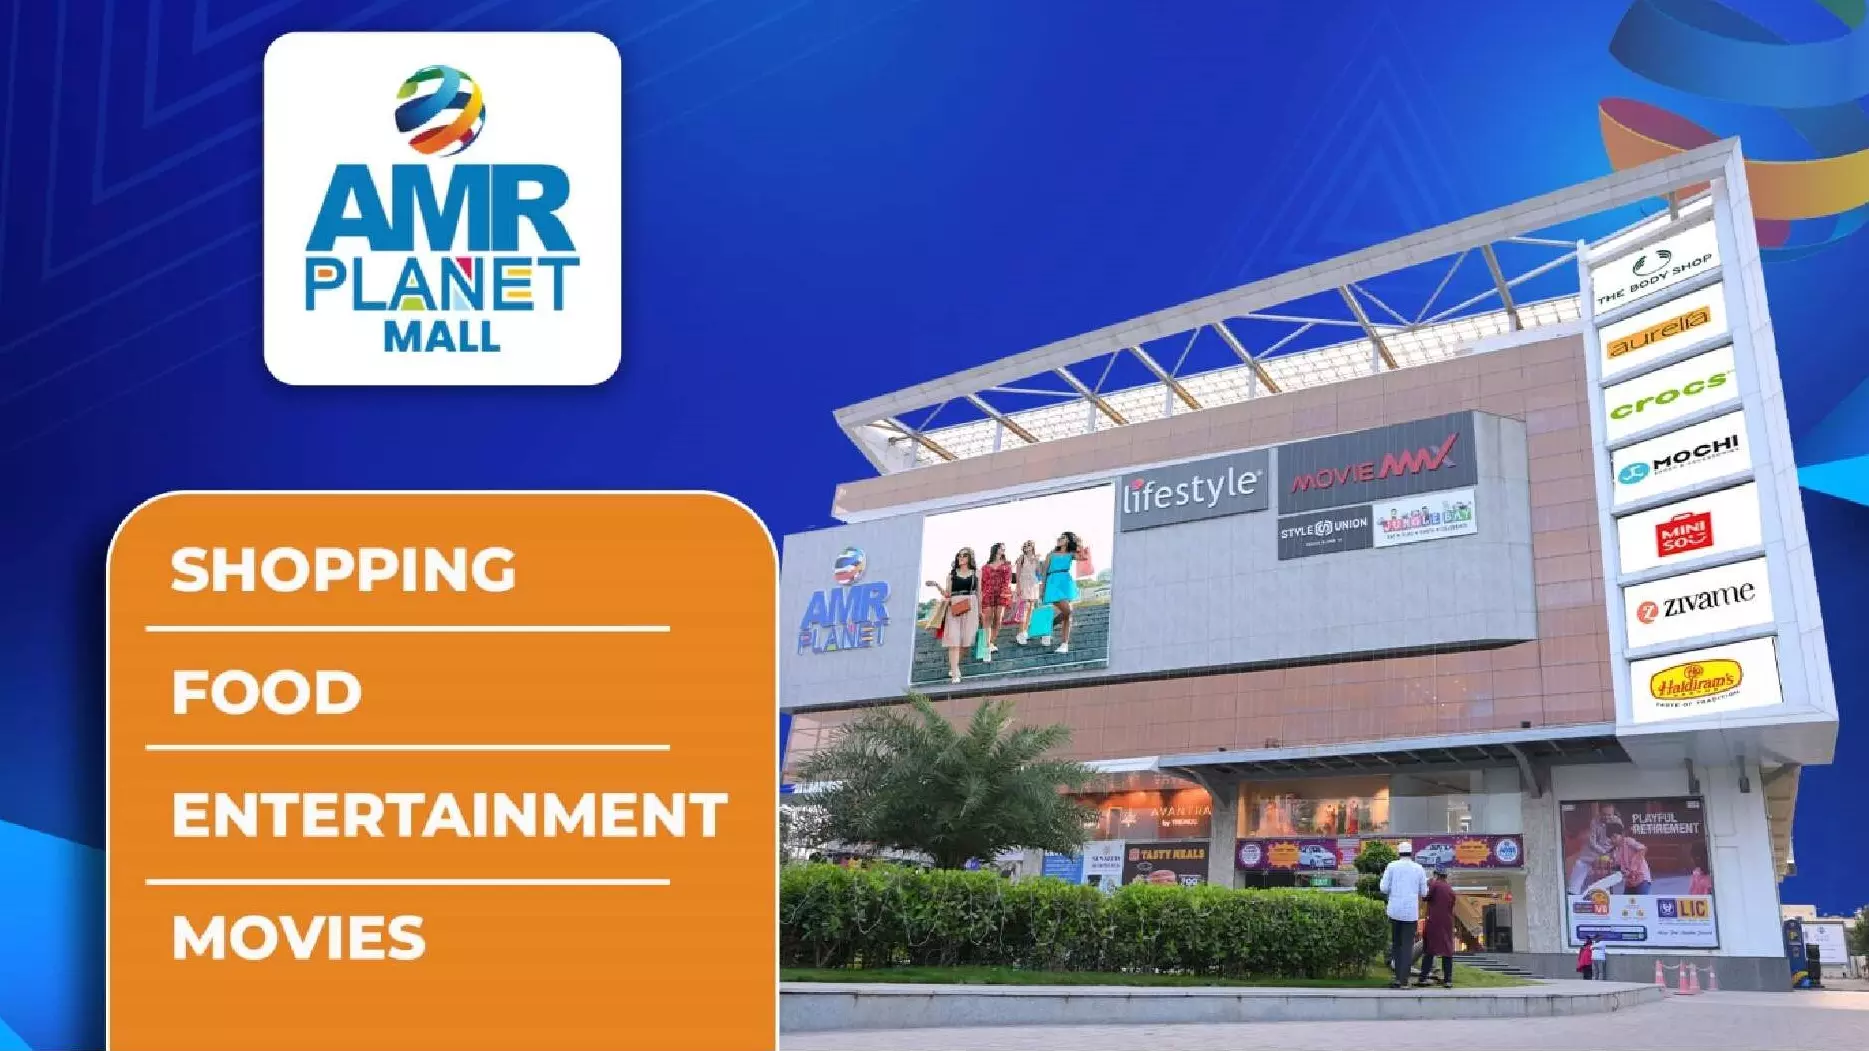 AMR Planet Mall, the Best mall in Secunderabad, has become a shopper’s paradise